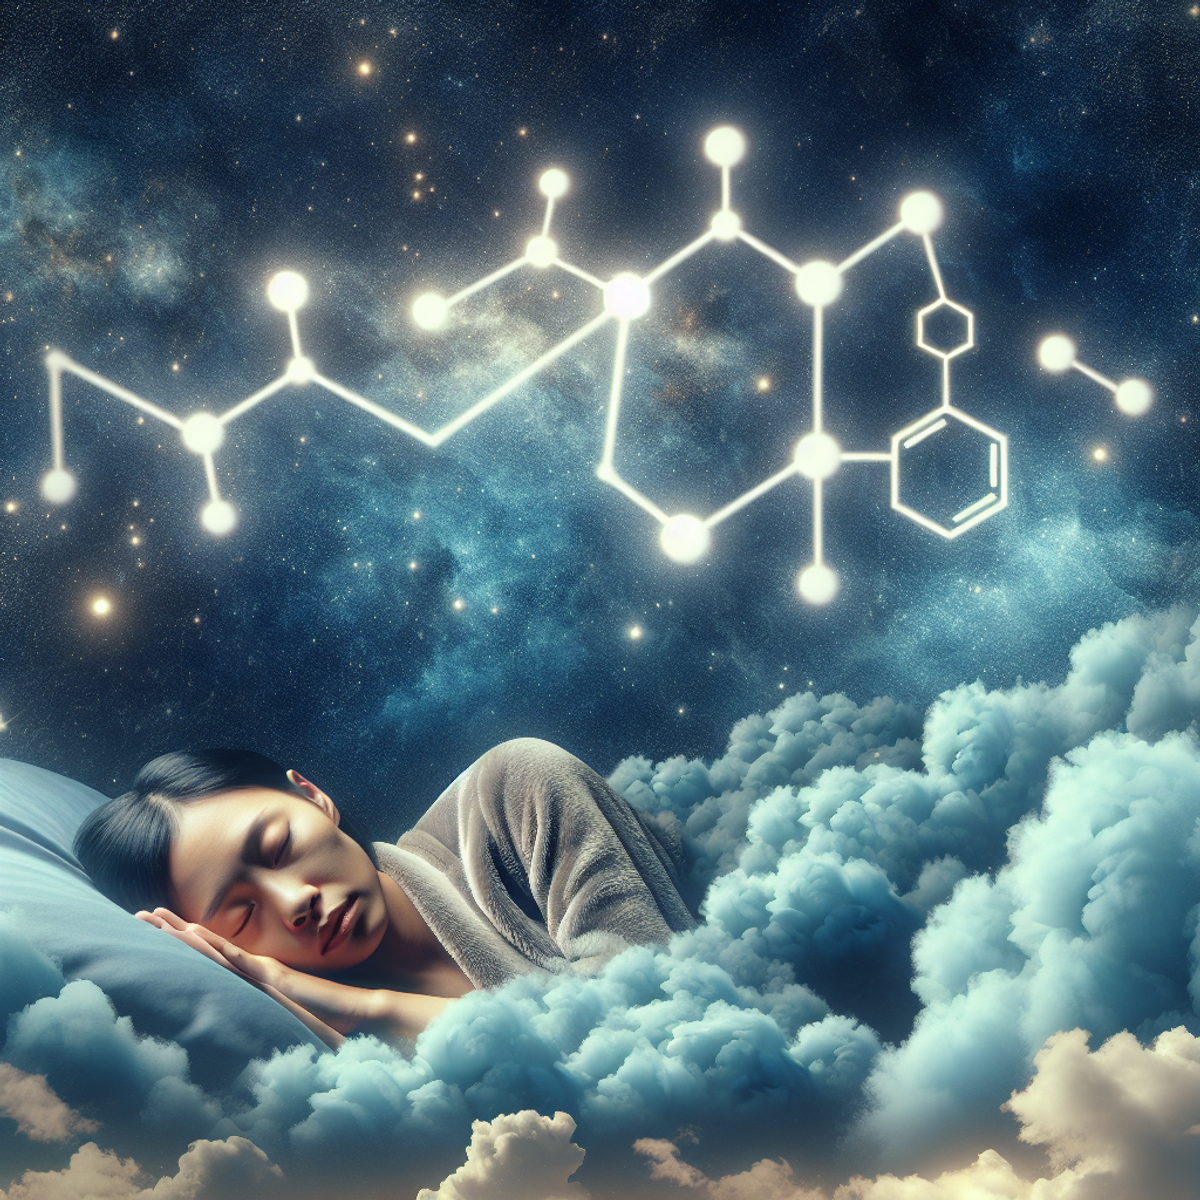 A person of Asian descent peacefully sleeping under a starry night sky with soft, fluffy clouds and an abstract representation of a molecule in the background.